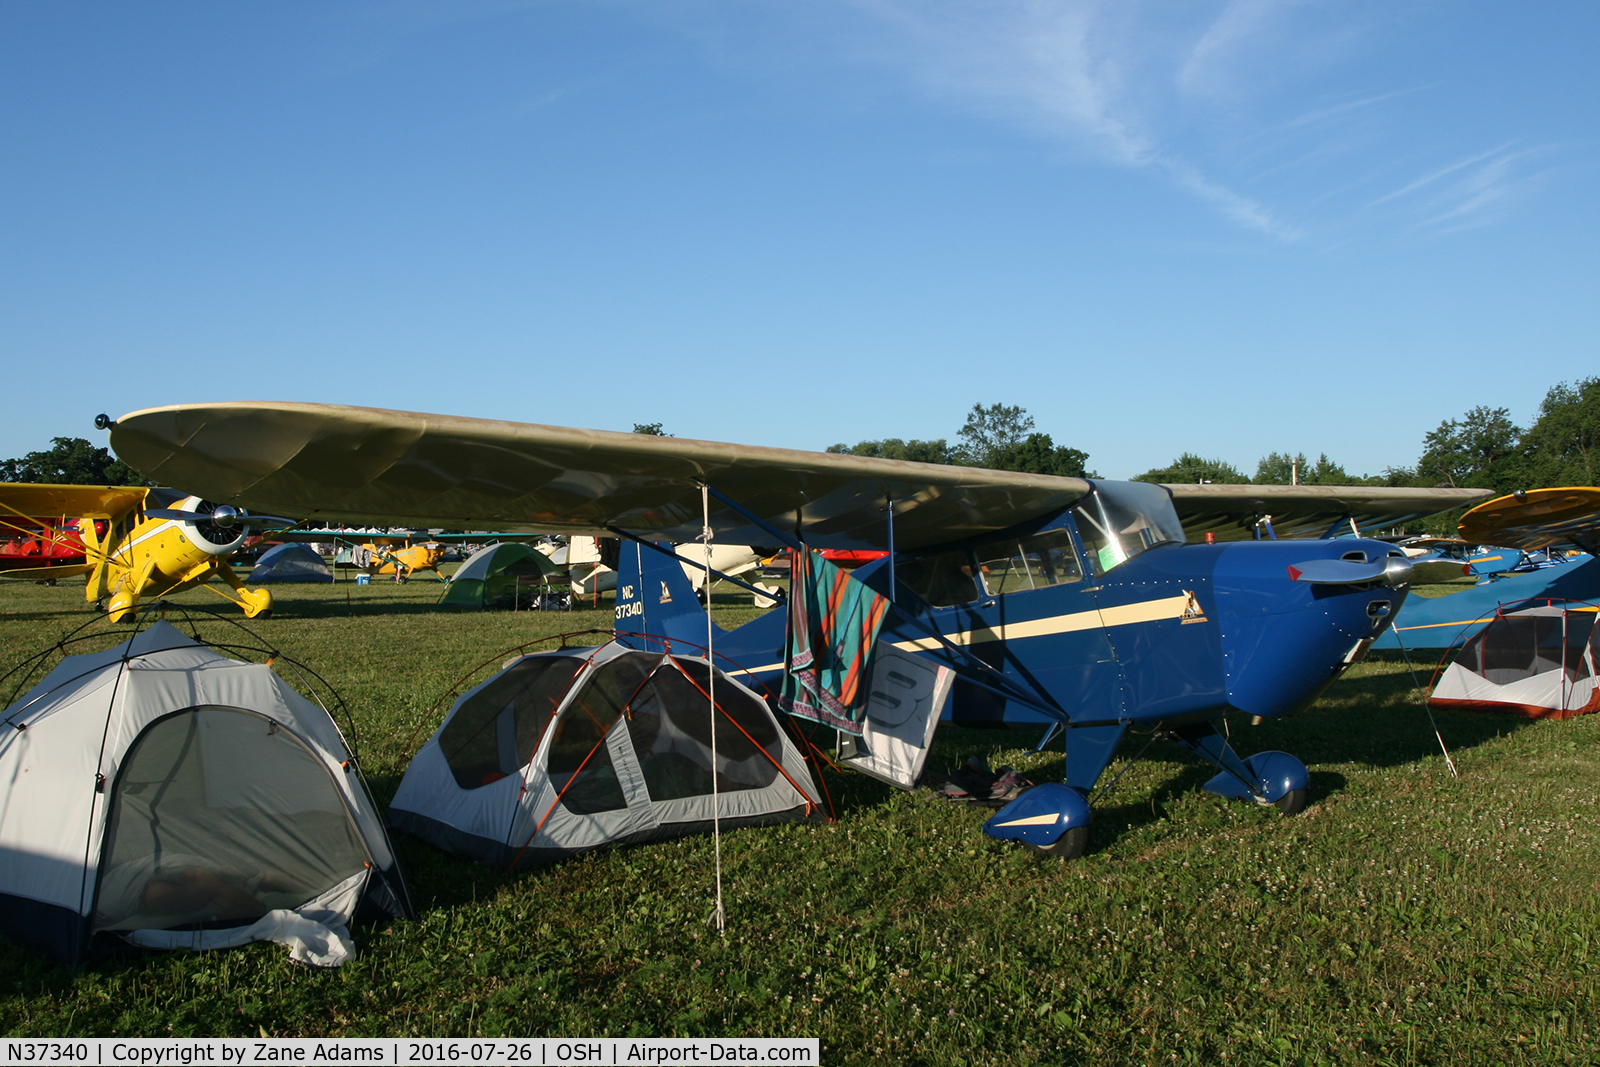 N37340, 1941 Interstate S-1A Cadet C/N 183, At the 2016 EAA AirVenture - Oshkosh, Wisconsin